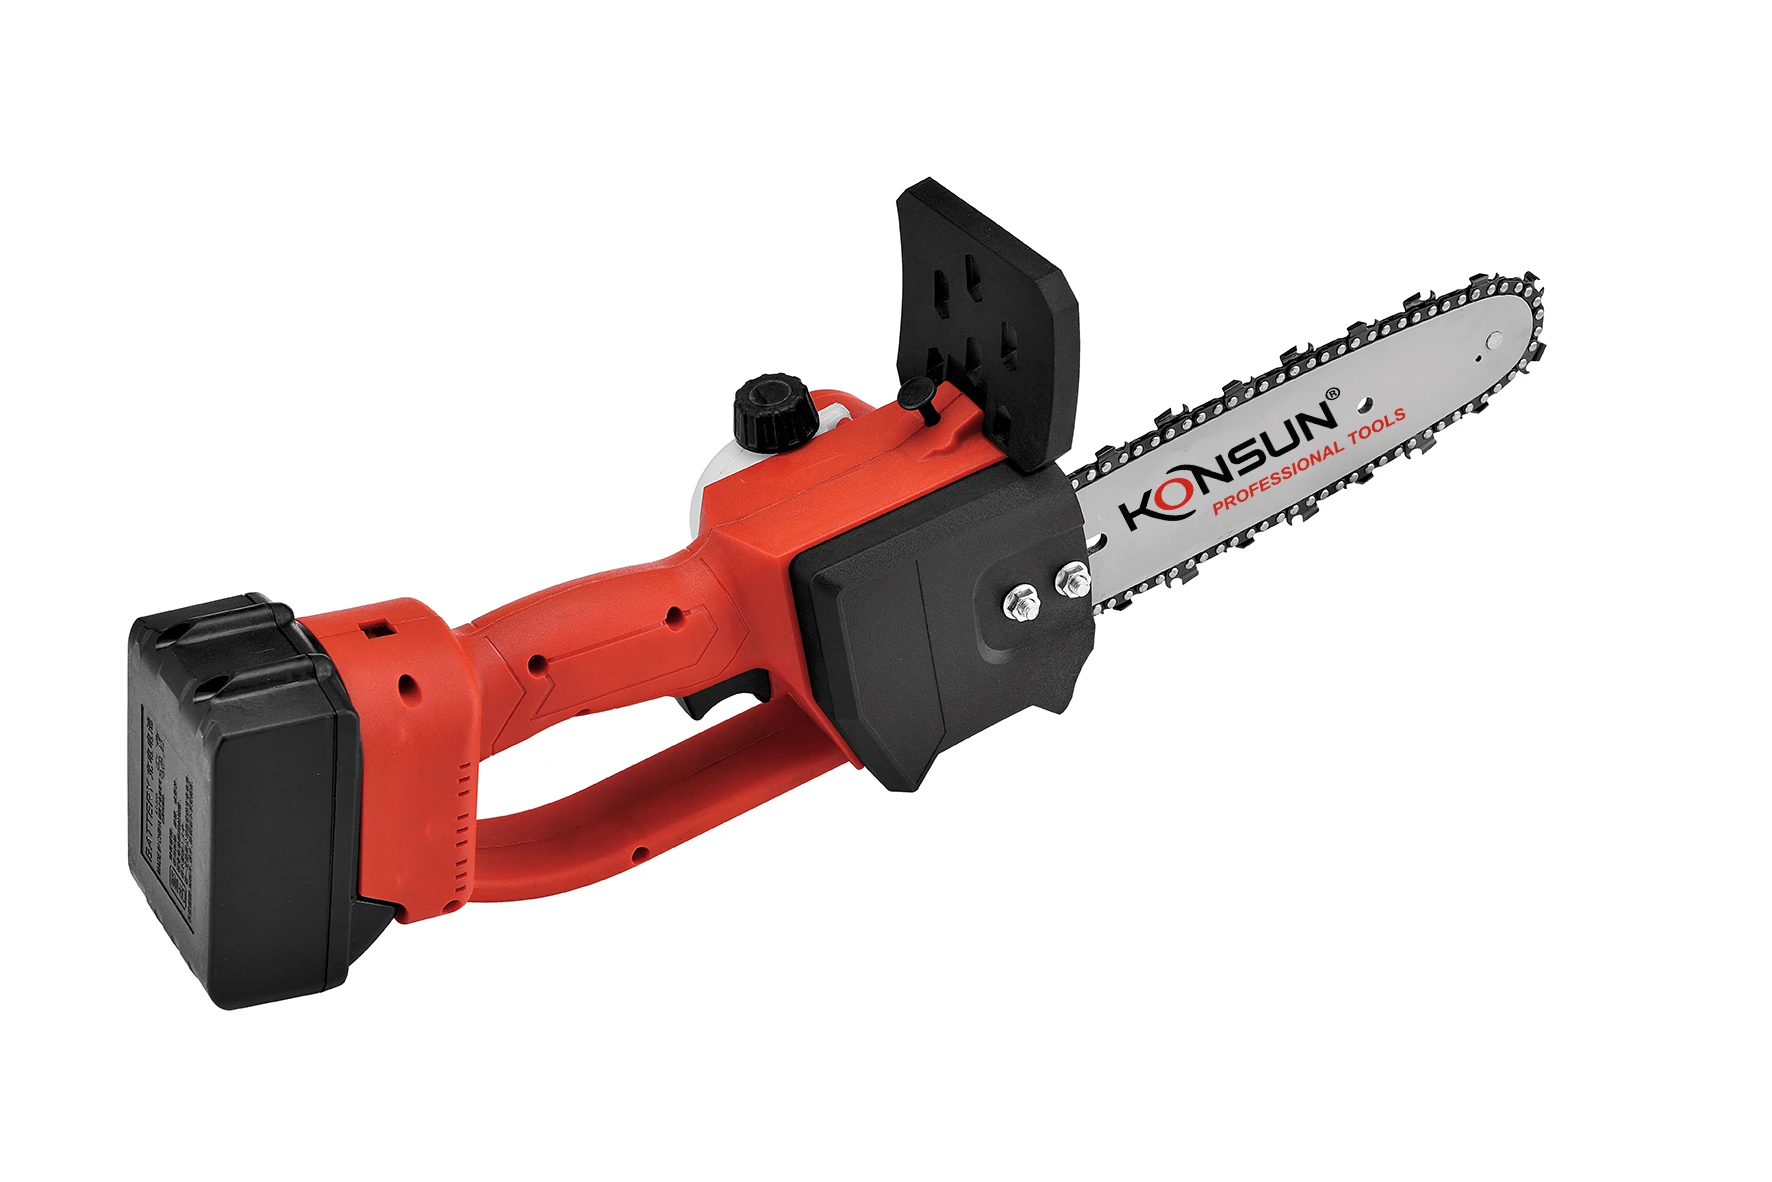 brushless motor 42V cordless chain saw with 16" bar Cordless Saws Chainsaws Application Forestry work